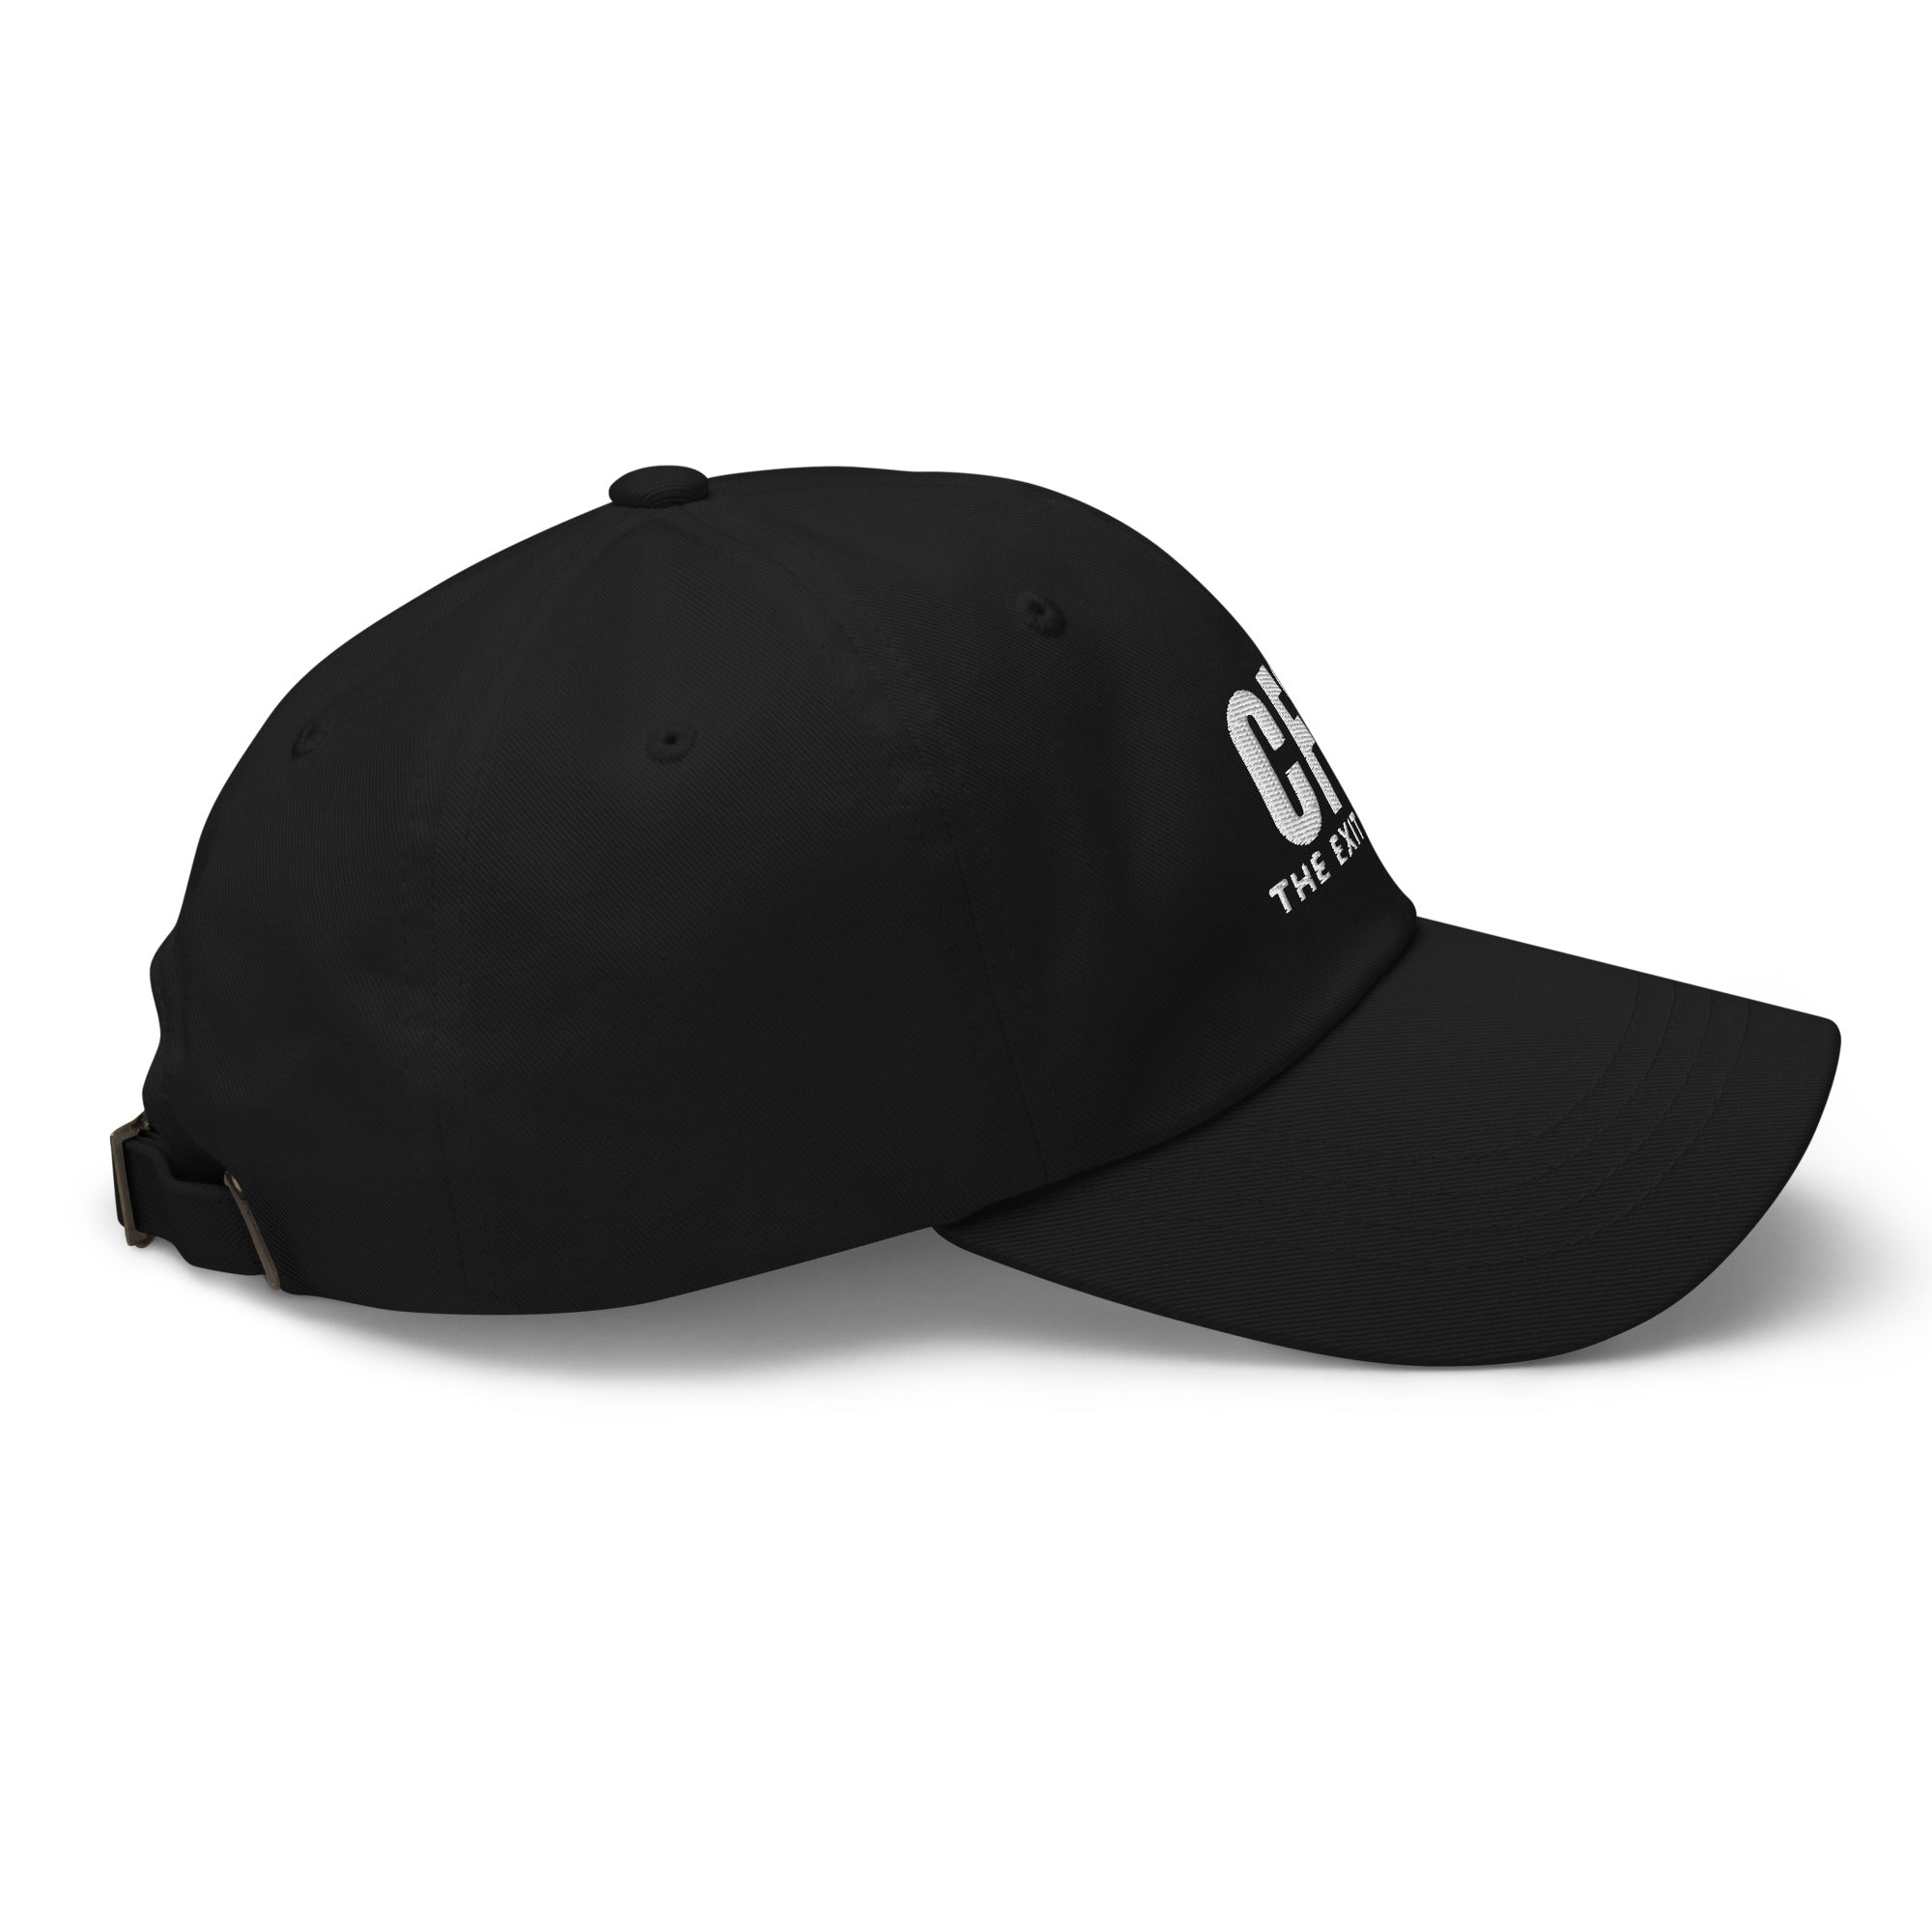 CHIEF FINANCIAL OFFICER HAT